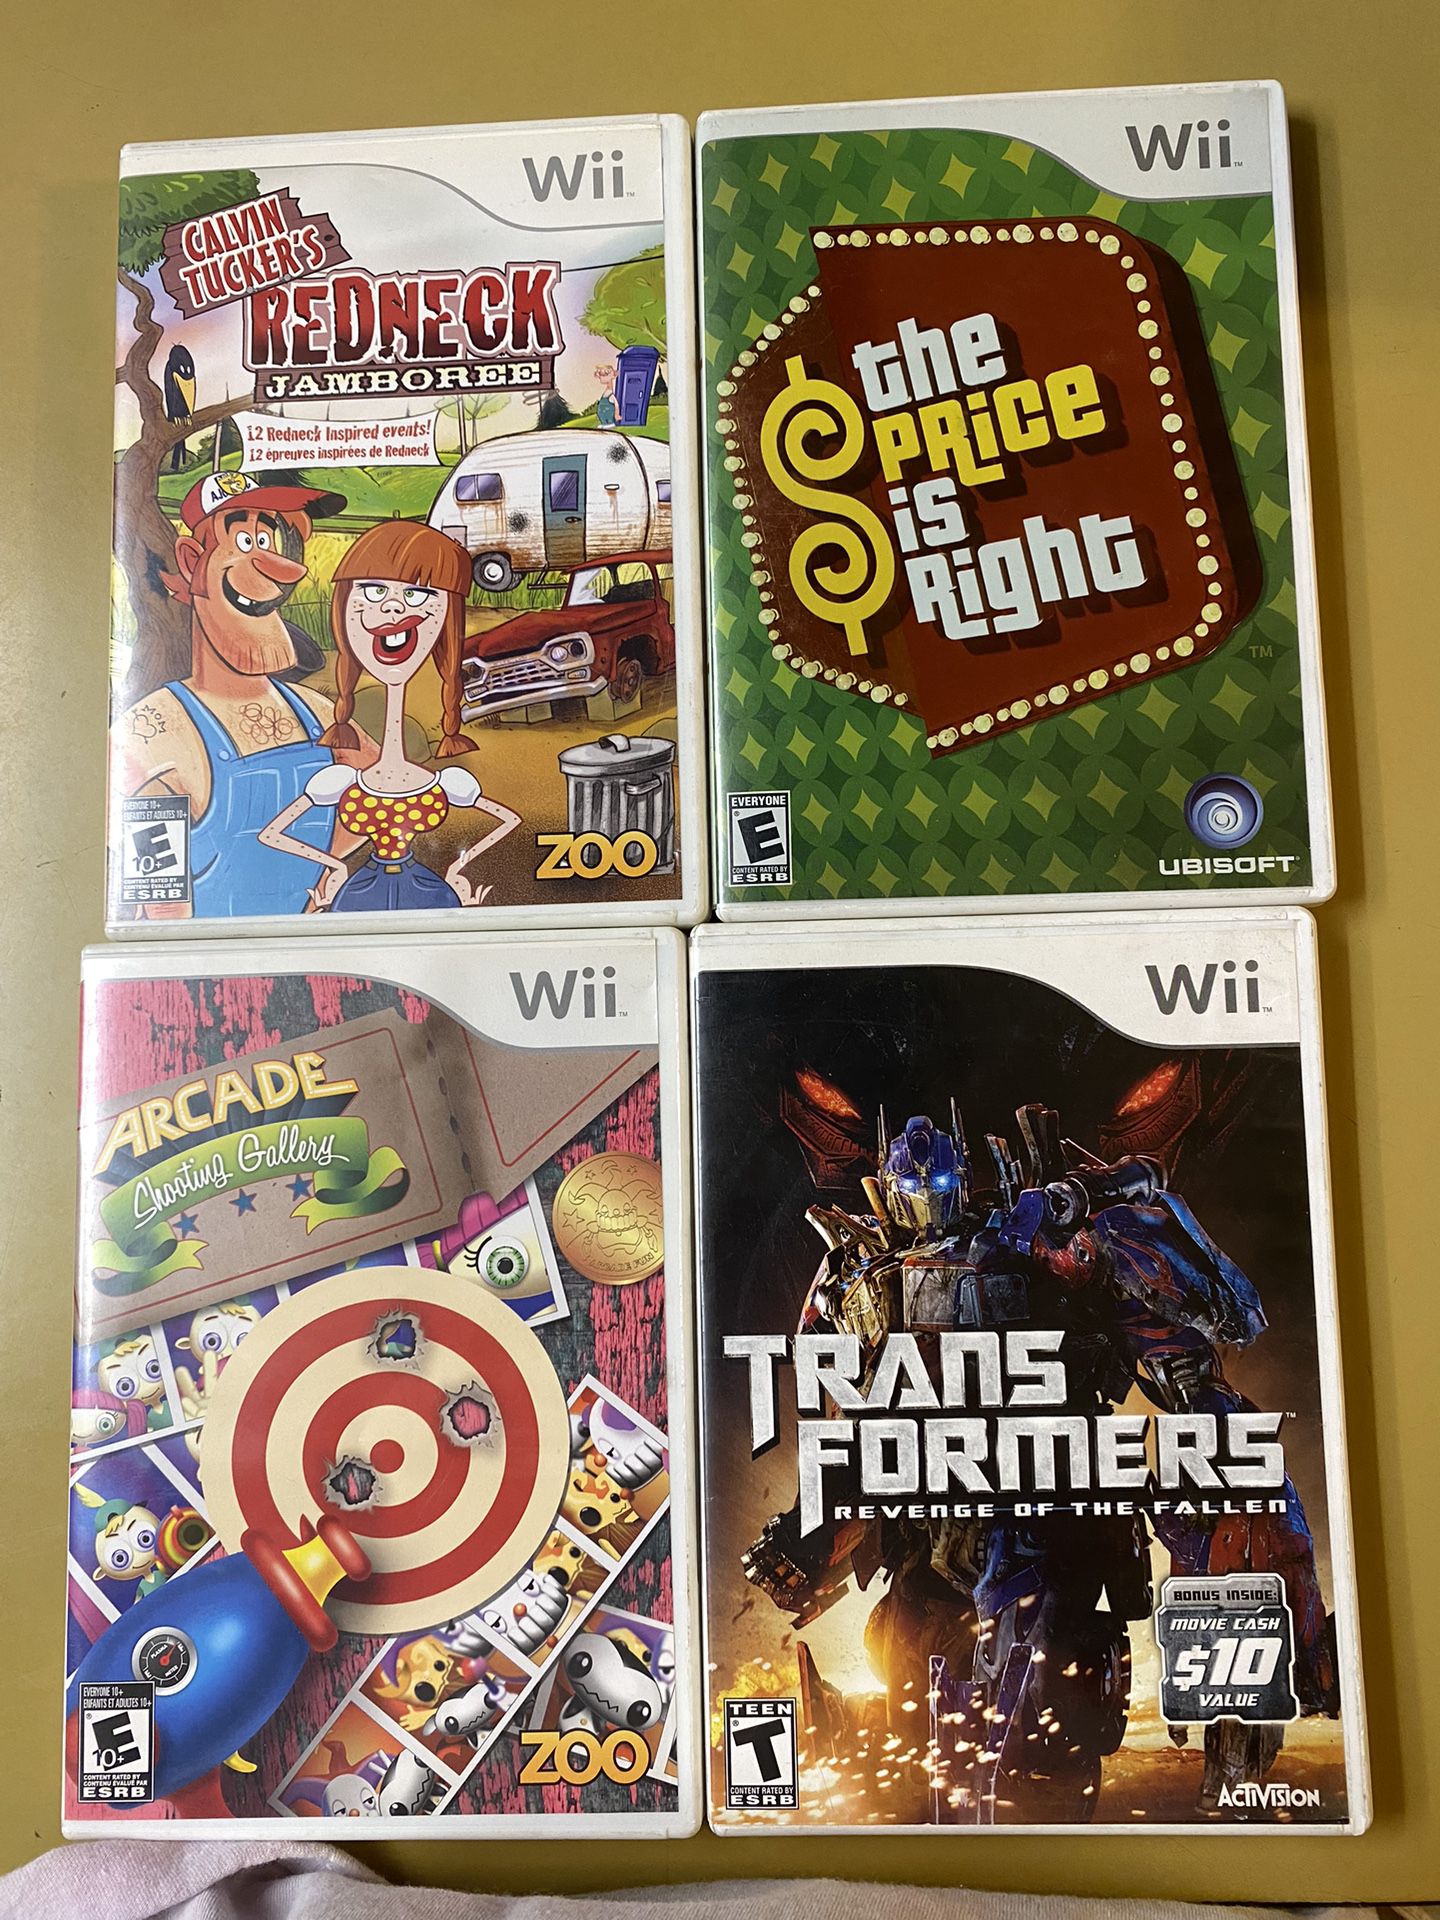 Nintendo Wii Game Lot (transformers,the price Is Right ,arcade Shooter,red neck Shooter)